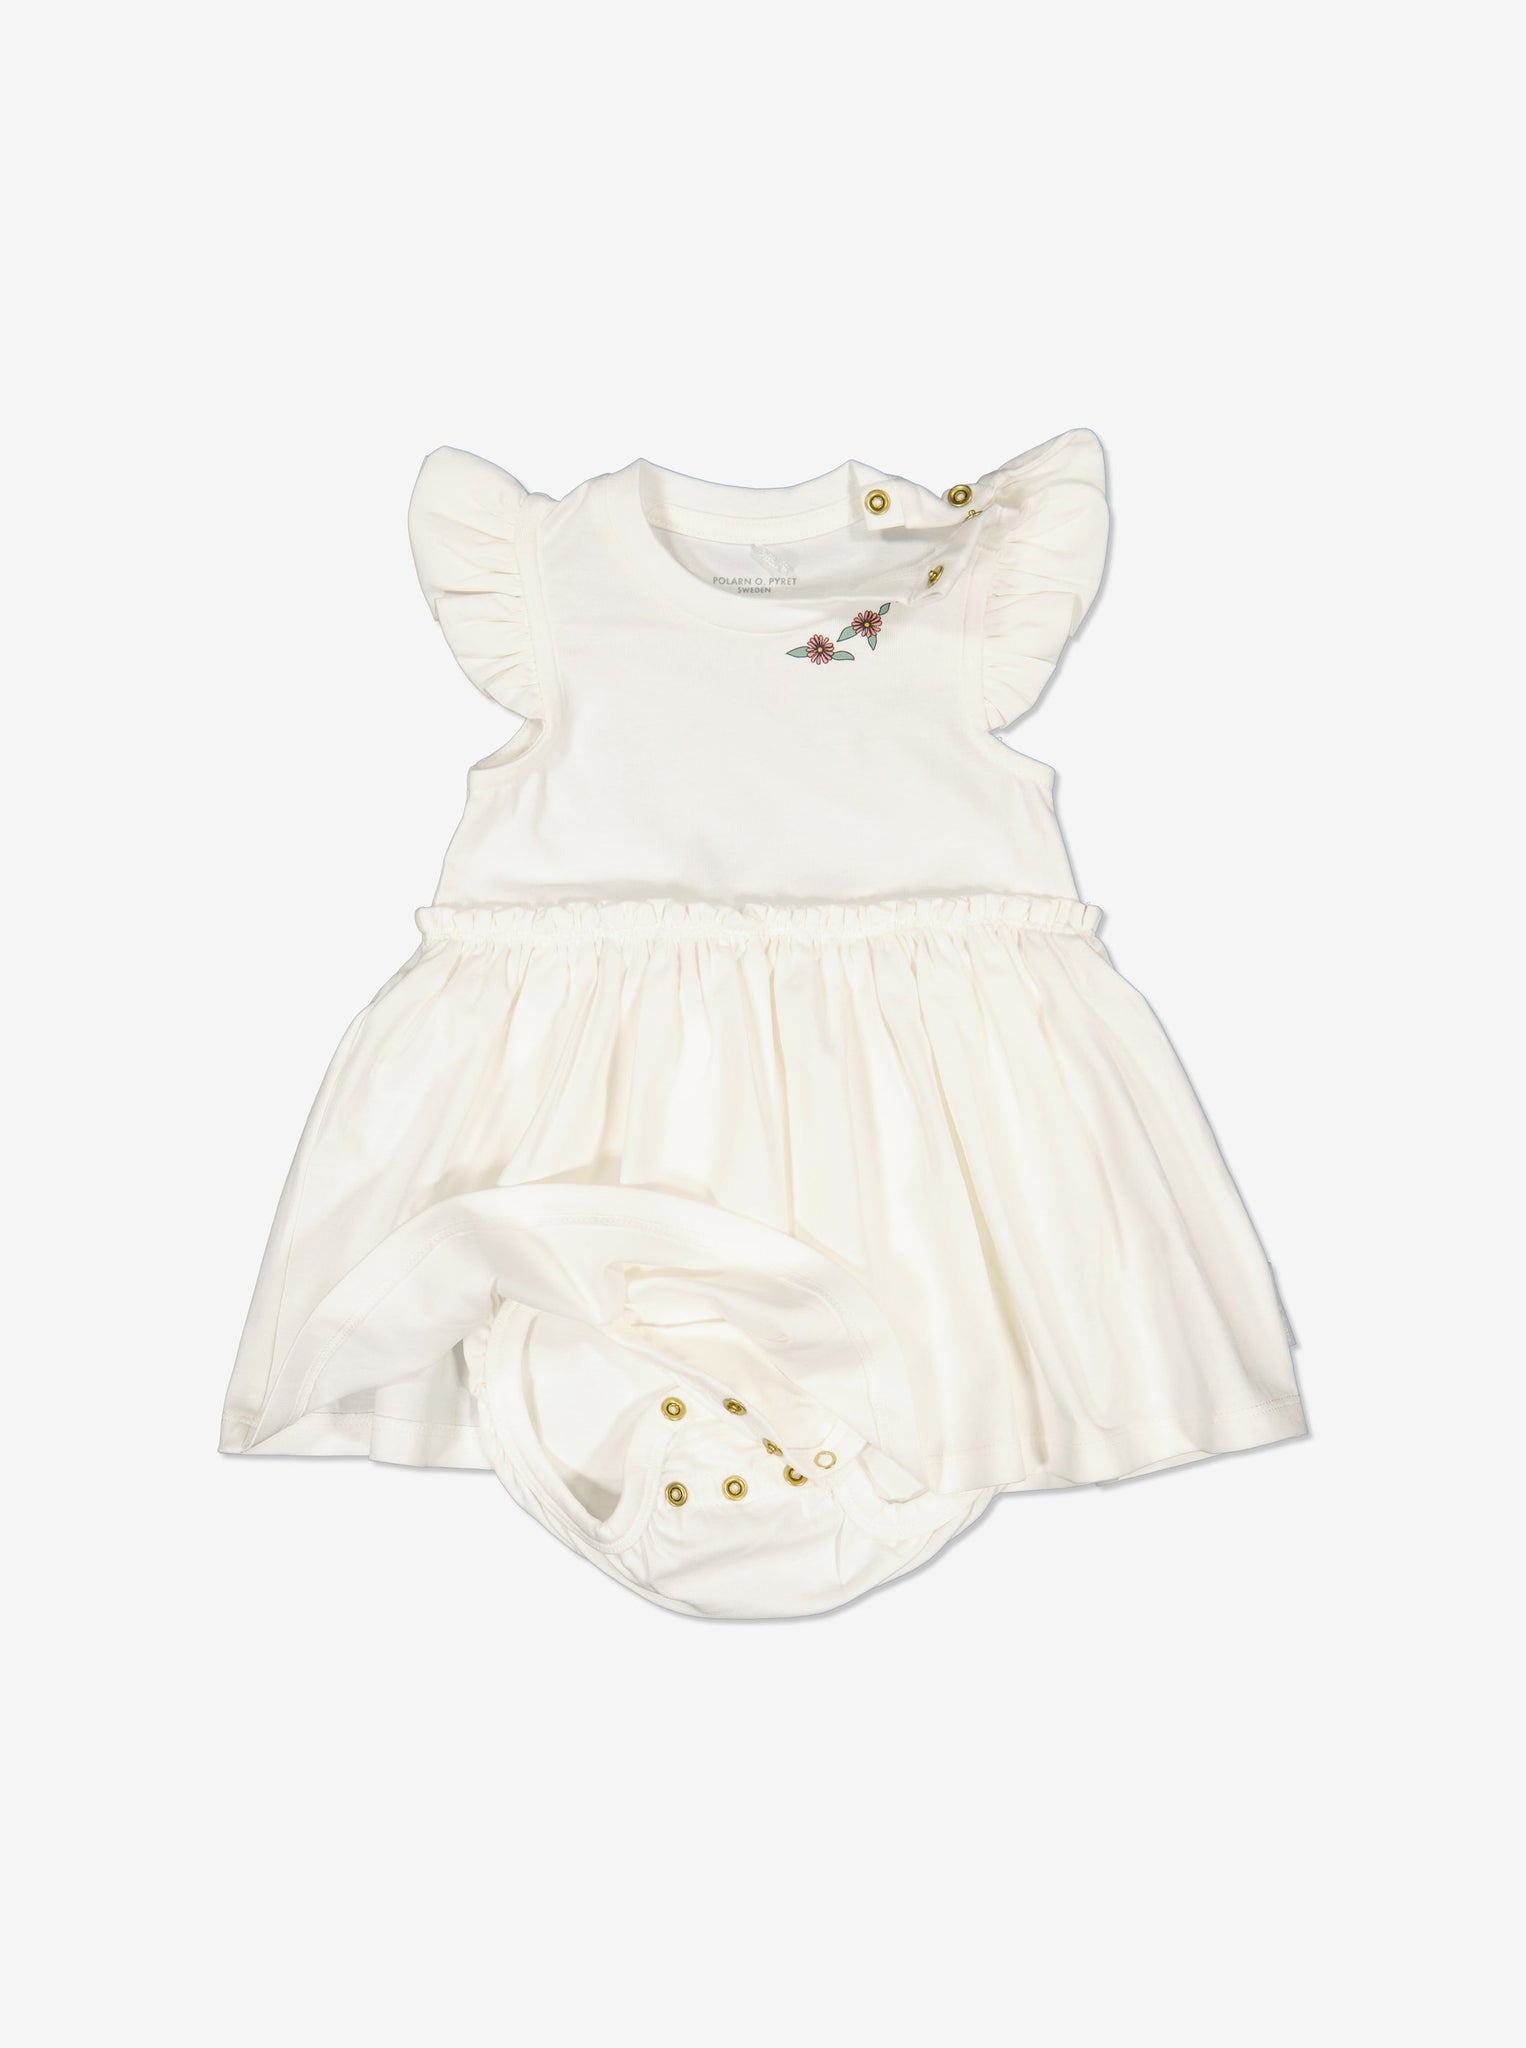 Floral Print White Babygrow Dress from Polarn O. Pyret Kidswear. Ethically made and sustainably sourced materials.